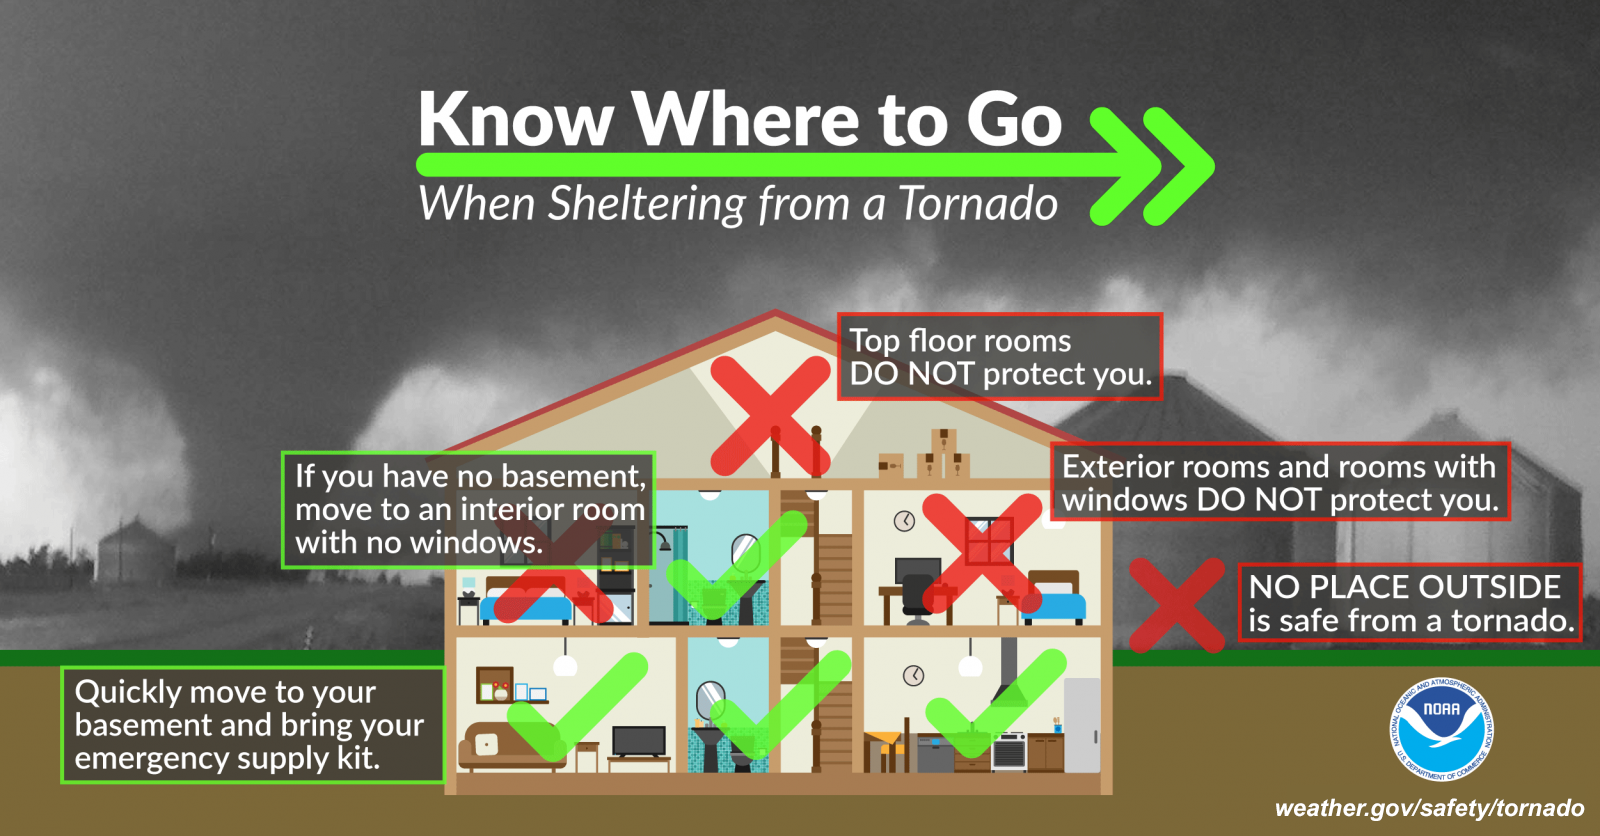 Know where to go when sheltering at home from a tornado. Quickly move to your basement and bring your emergency supply kit. If you have no basement, move to an interior room with no windows. Top floors DO NOT protect you. Exterior rooms and room with windows DO NOT protect you. No place outside is safe from a tornado.